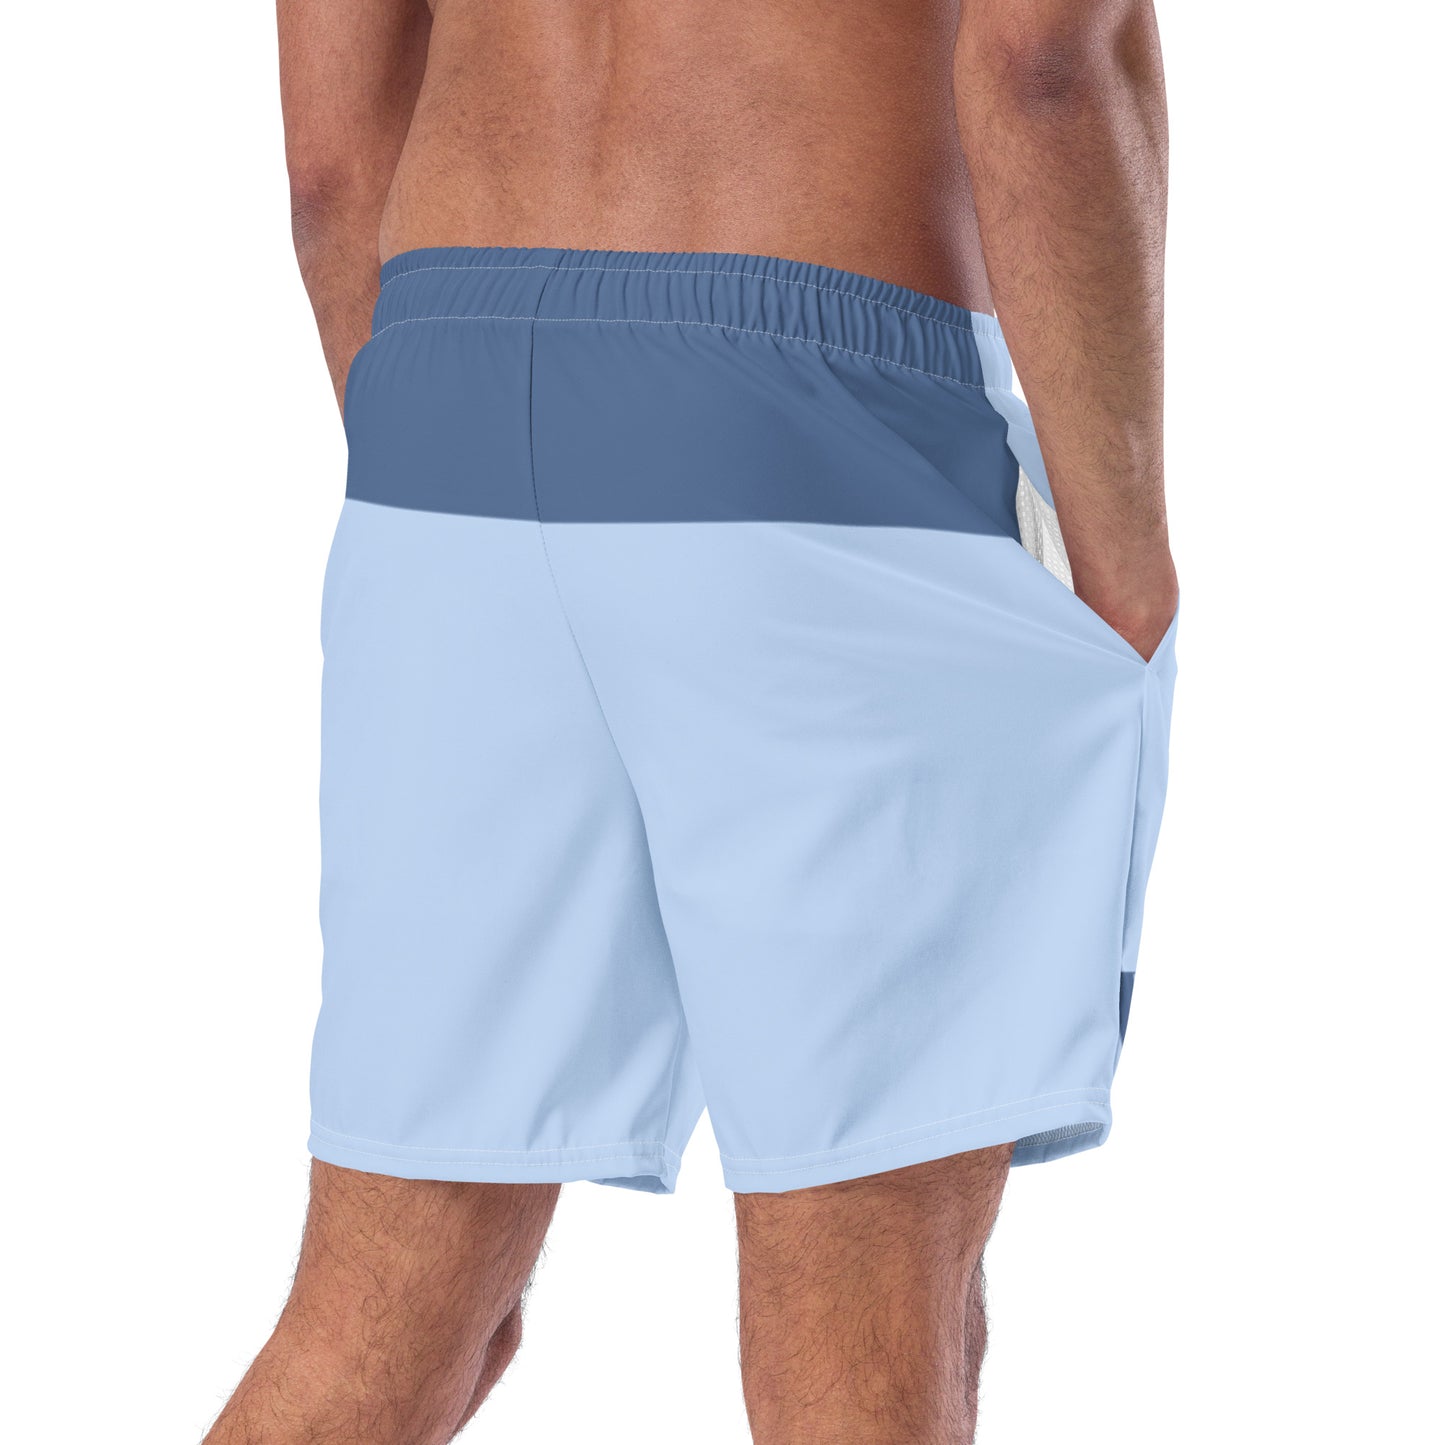 TIME OF VIBES - Men's Swim Trunks VIBES DUO (Hawkes/Kashmir Blue) - €59.00